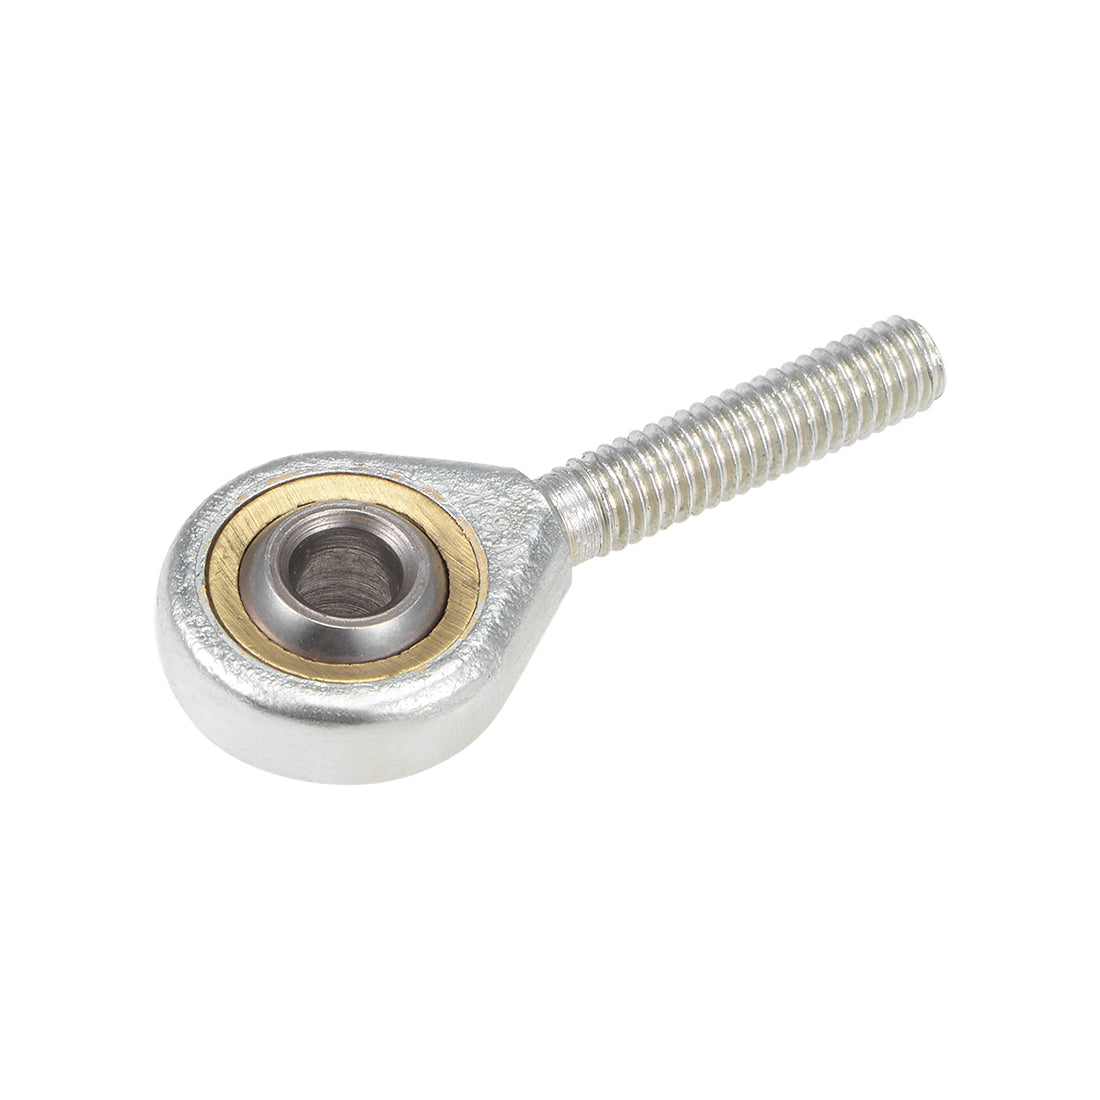 uxcell Uxcell 6mm Rod End Bearing M6x1.0 Rod Ends Ball Joint Male Left Hand Thread